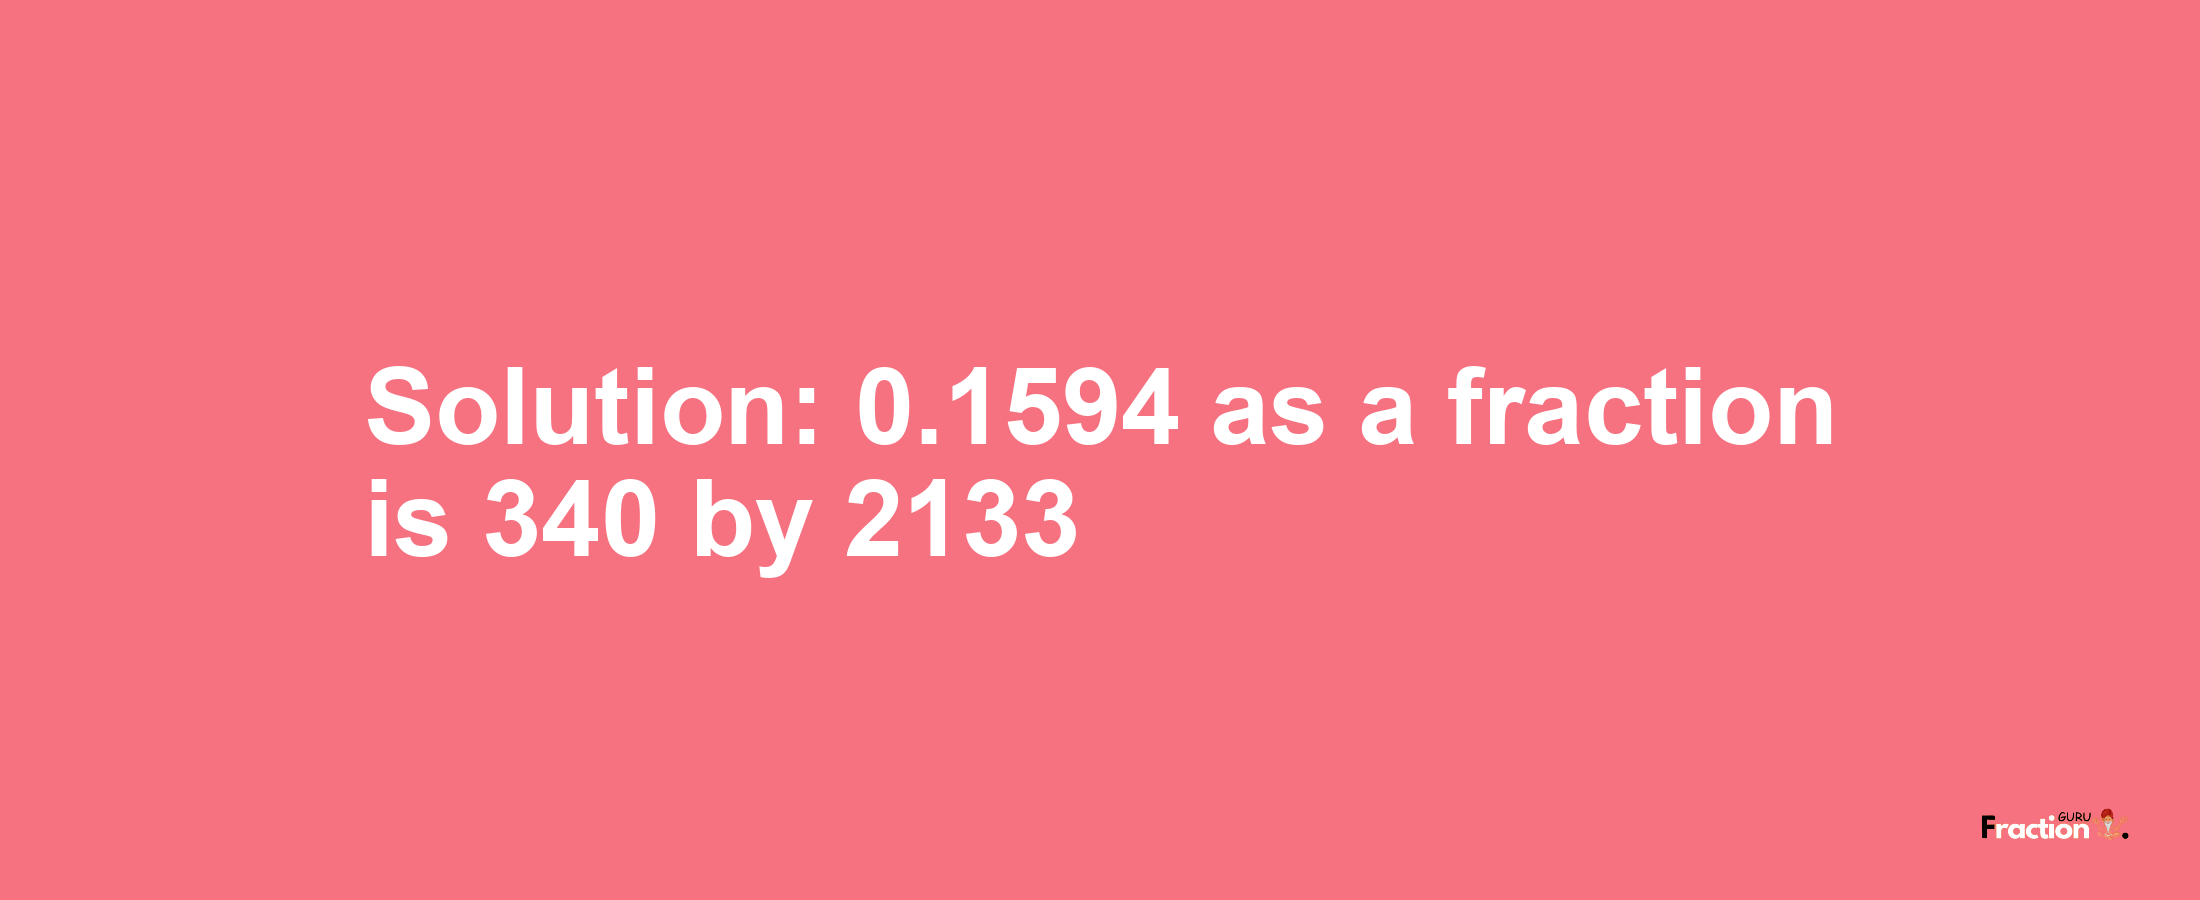 Solution:0.1594 as a fraction is 340/2133